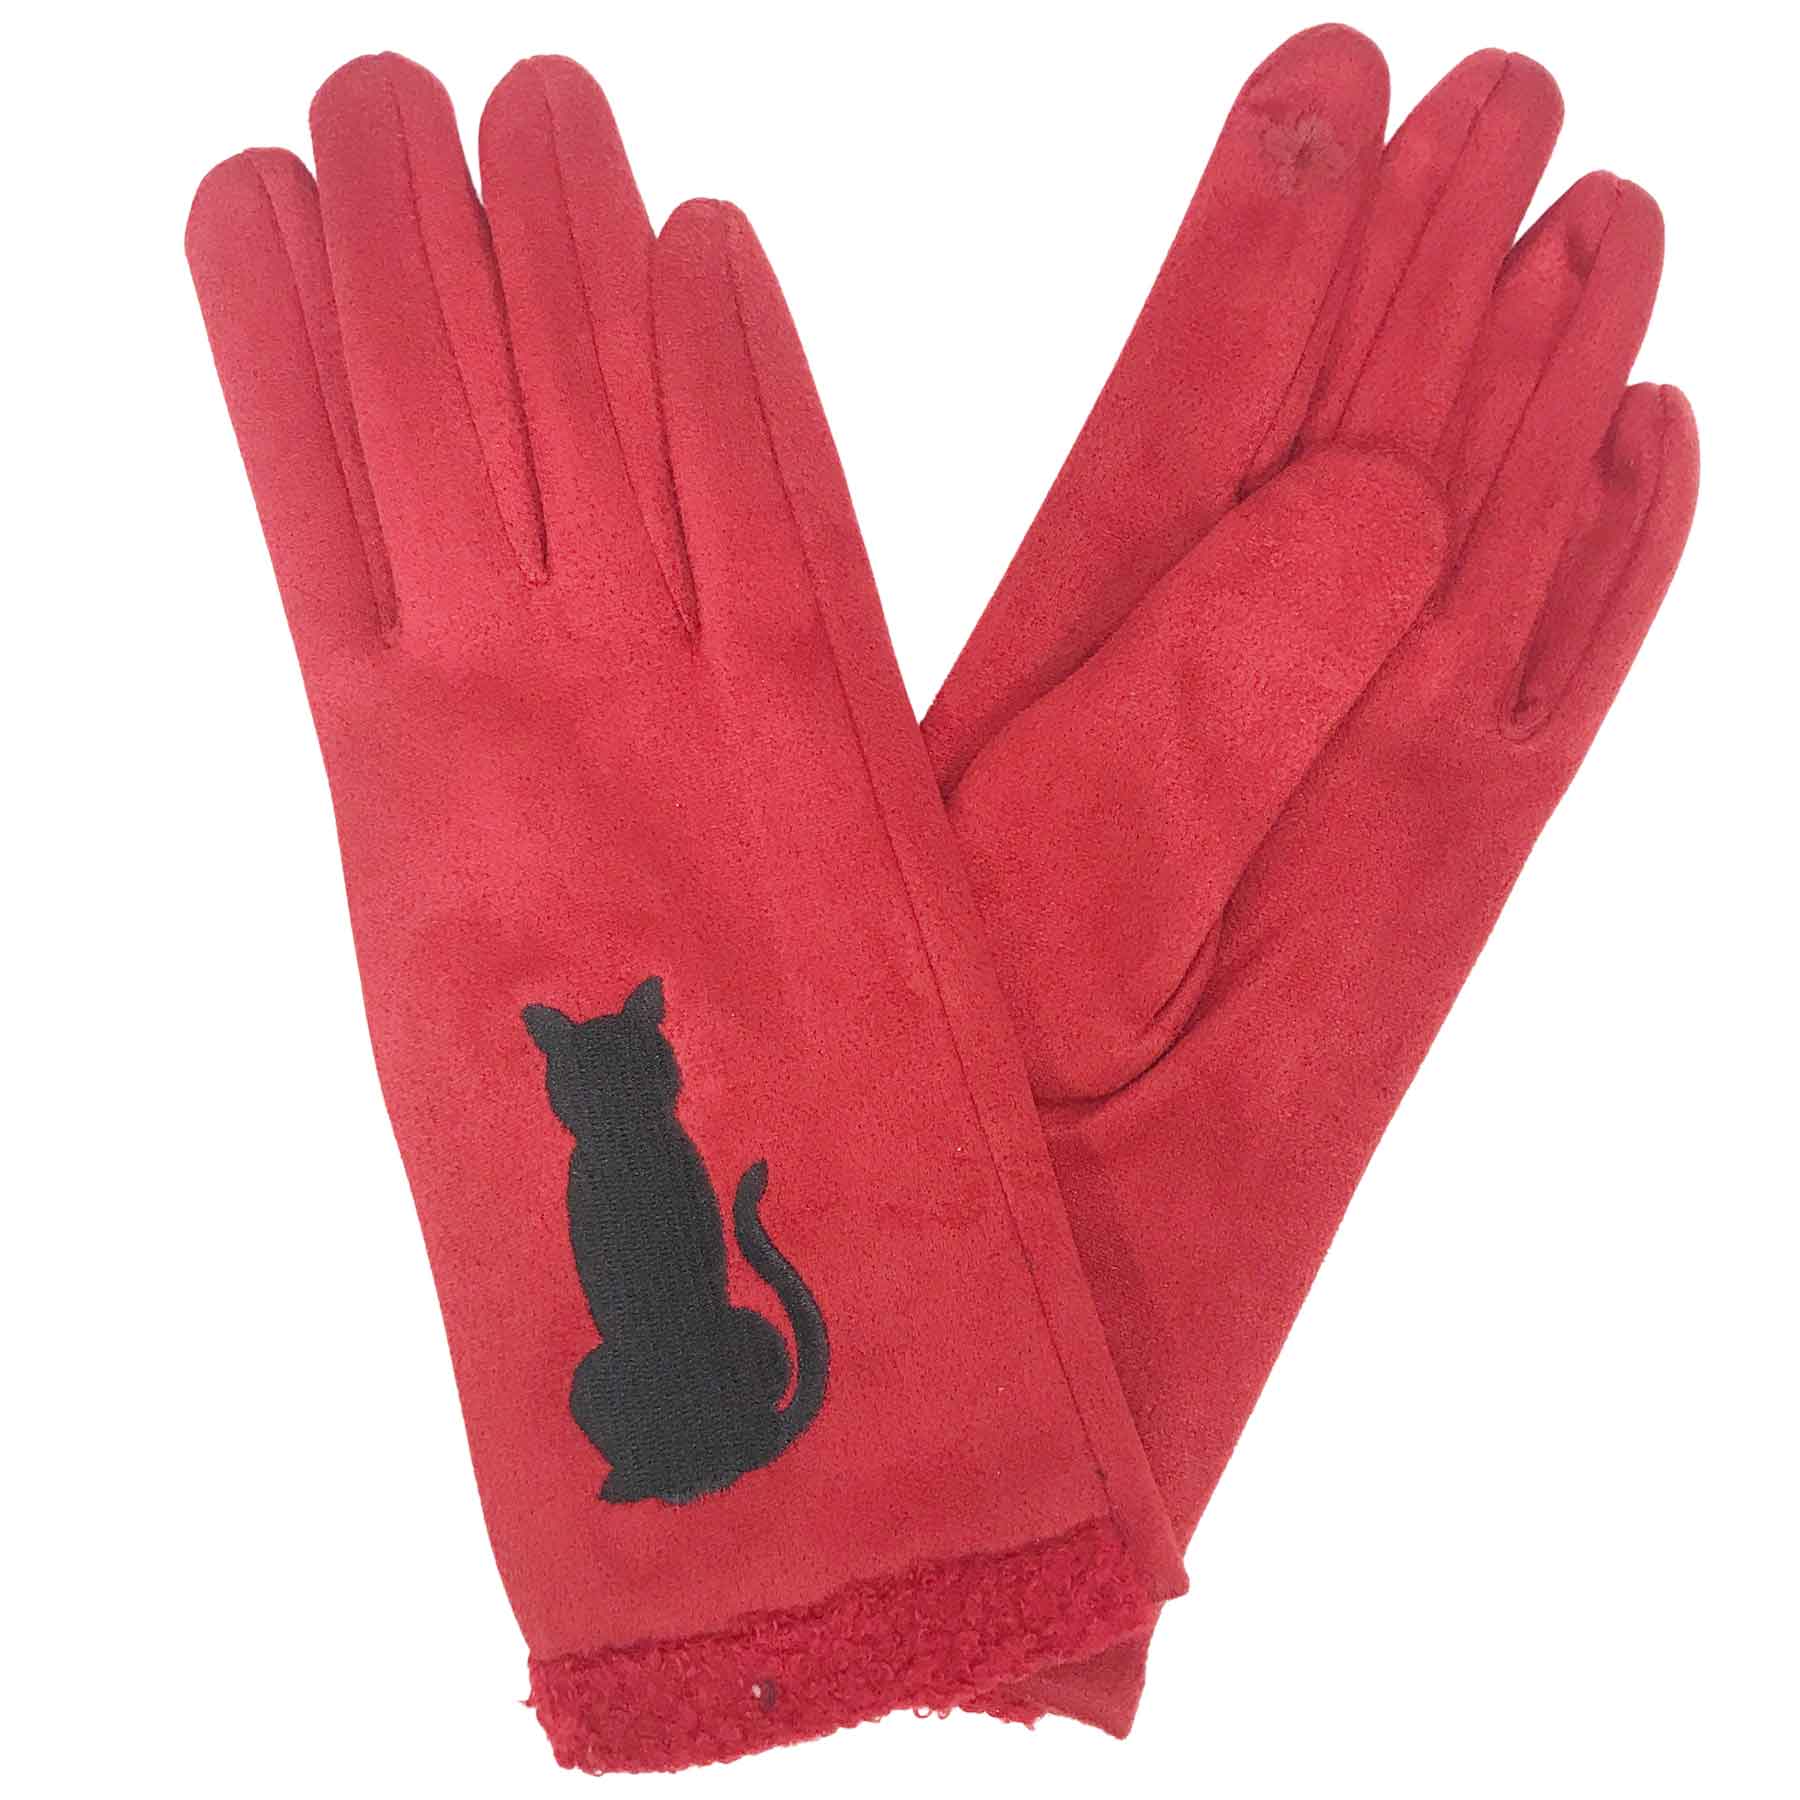 1229 - Red Cat Silhouette <br>
Touch Screen Smart Gloves